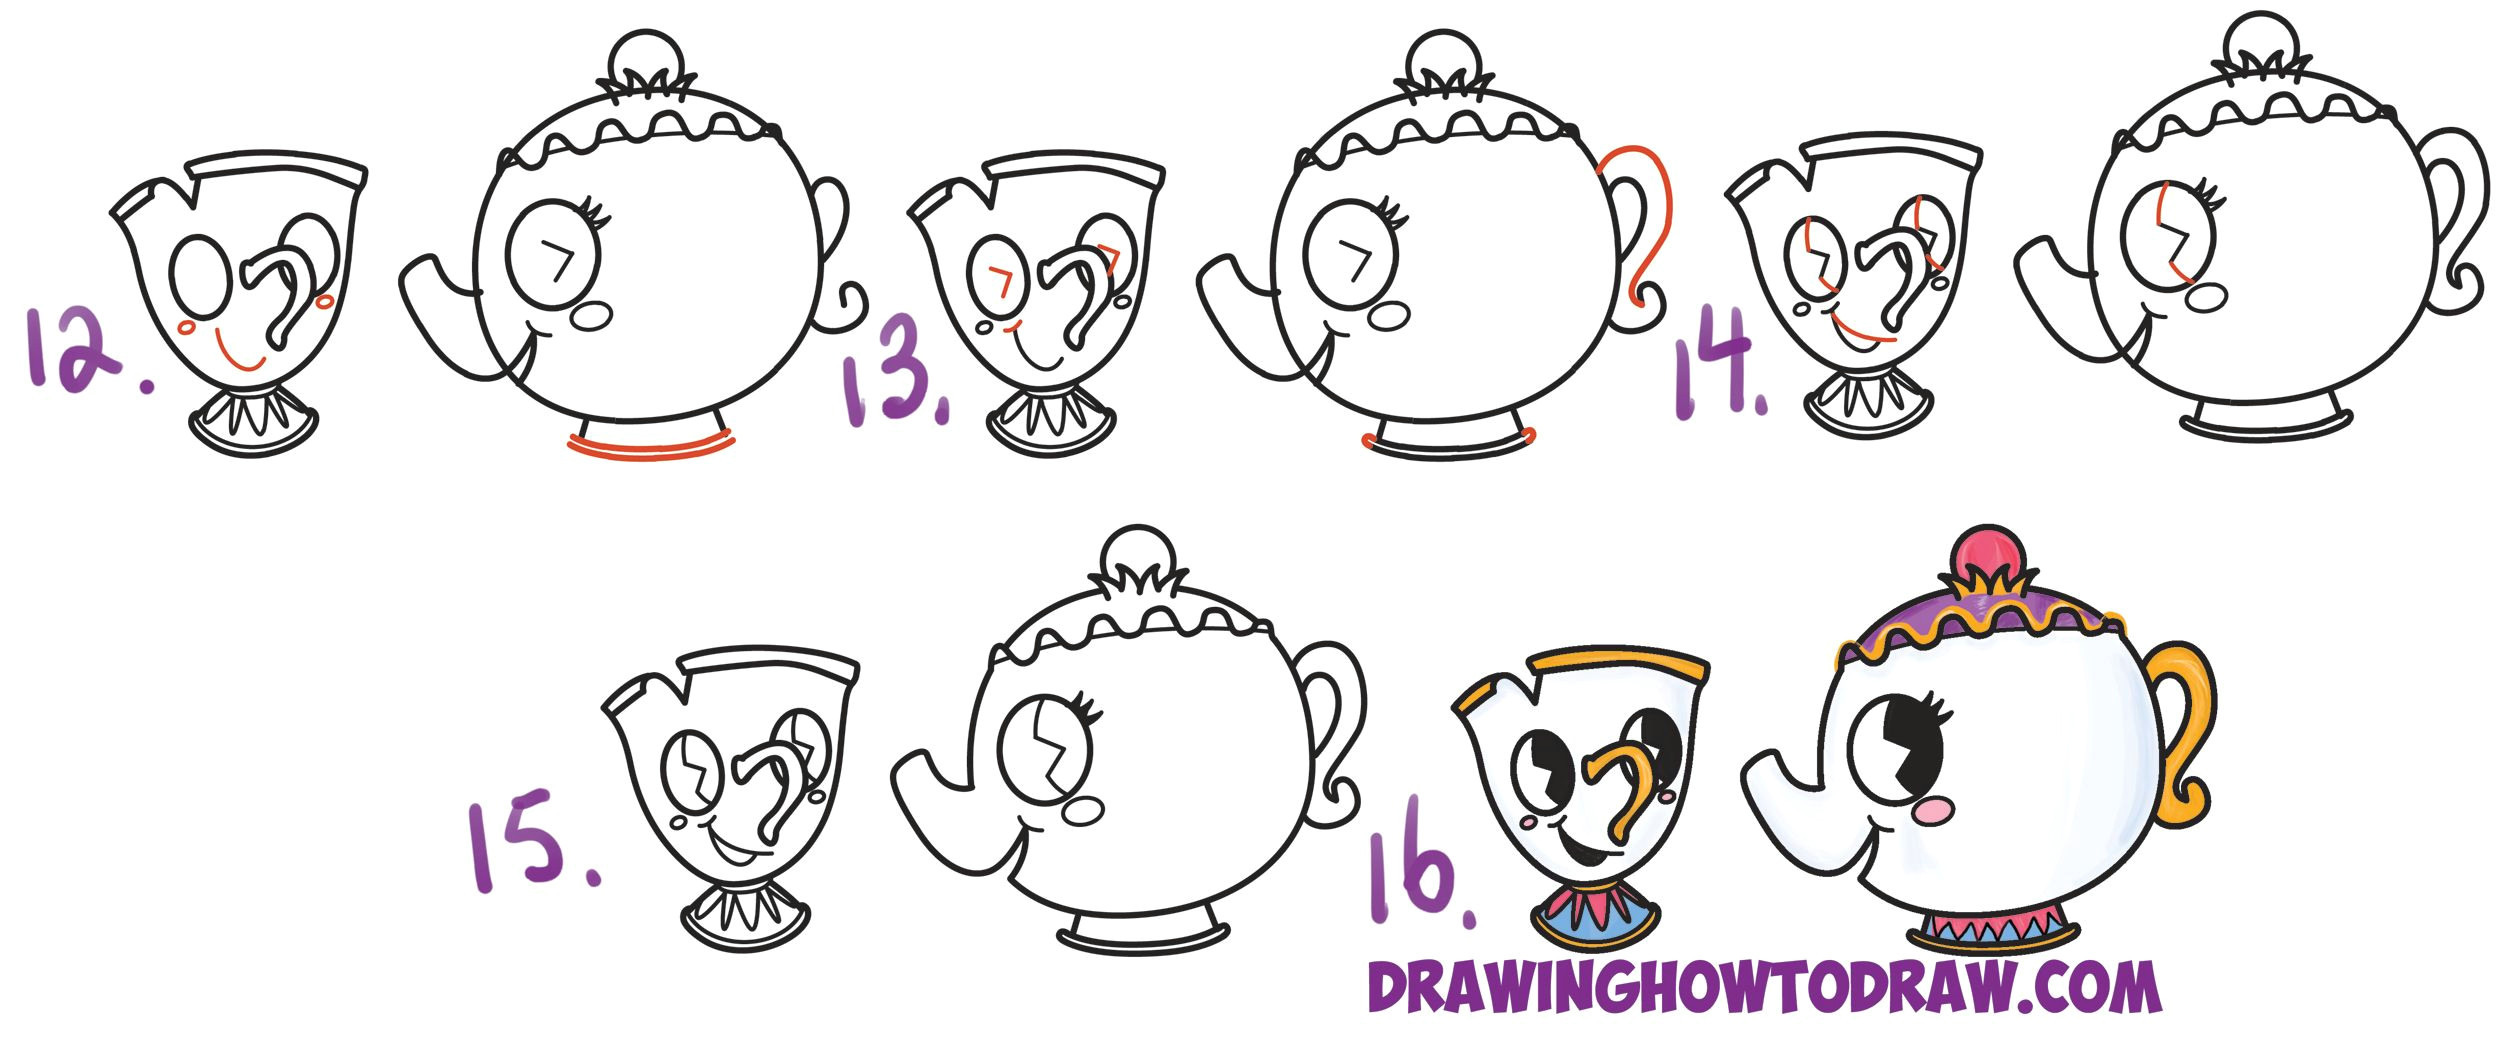 learn how to draw cute kawaii chibi mrs potts and chip from beauty and the beast simple steps drawing lesson for children and beginners